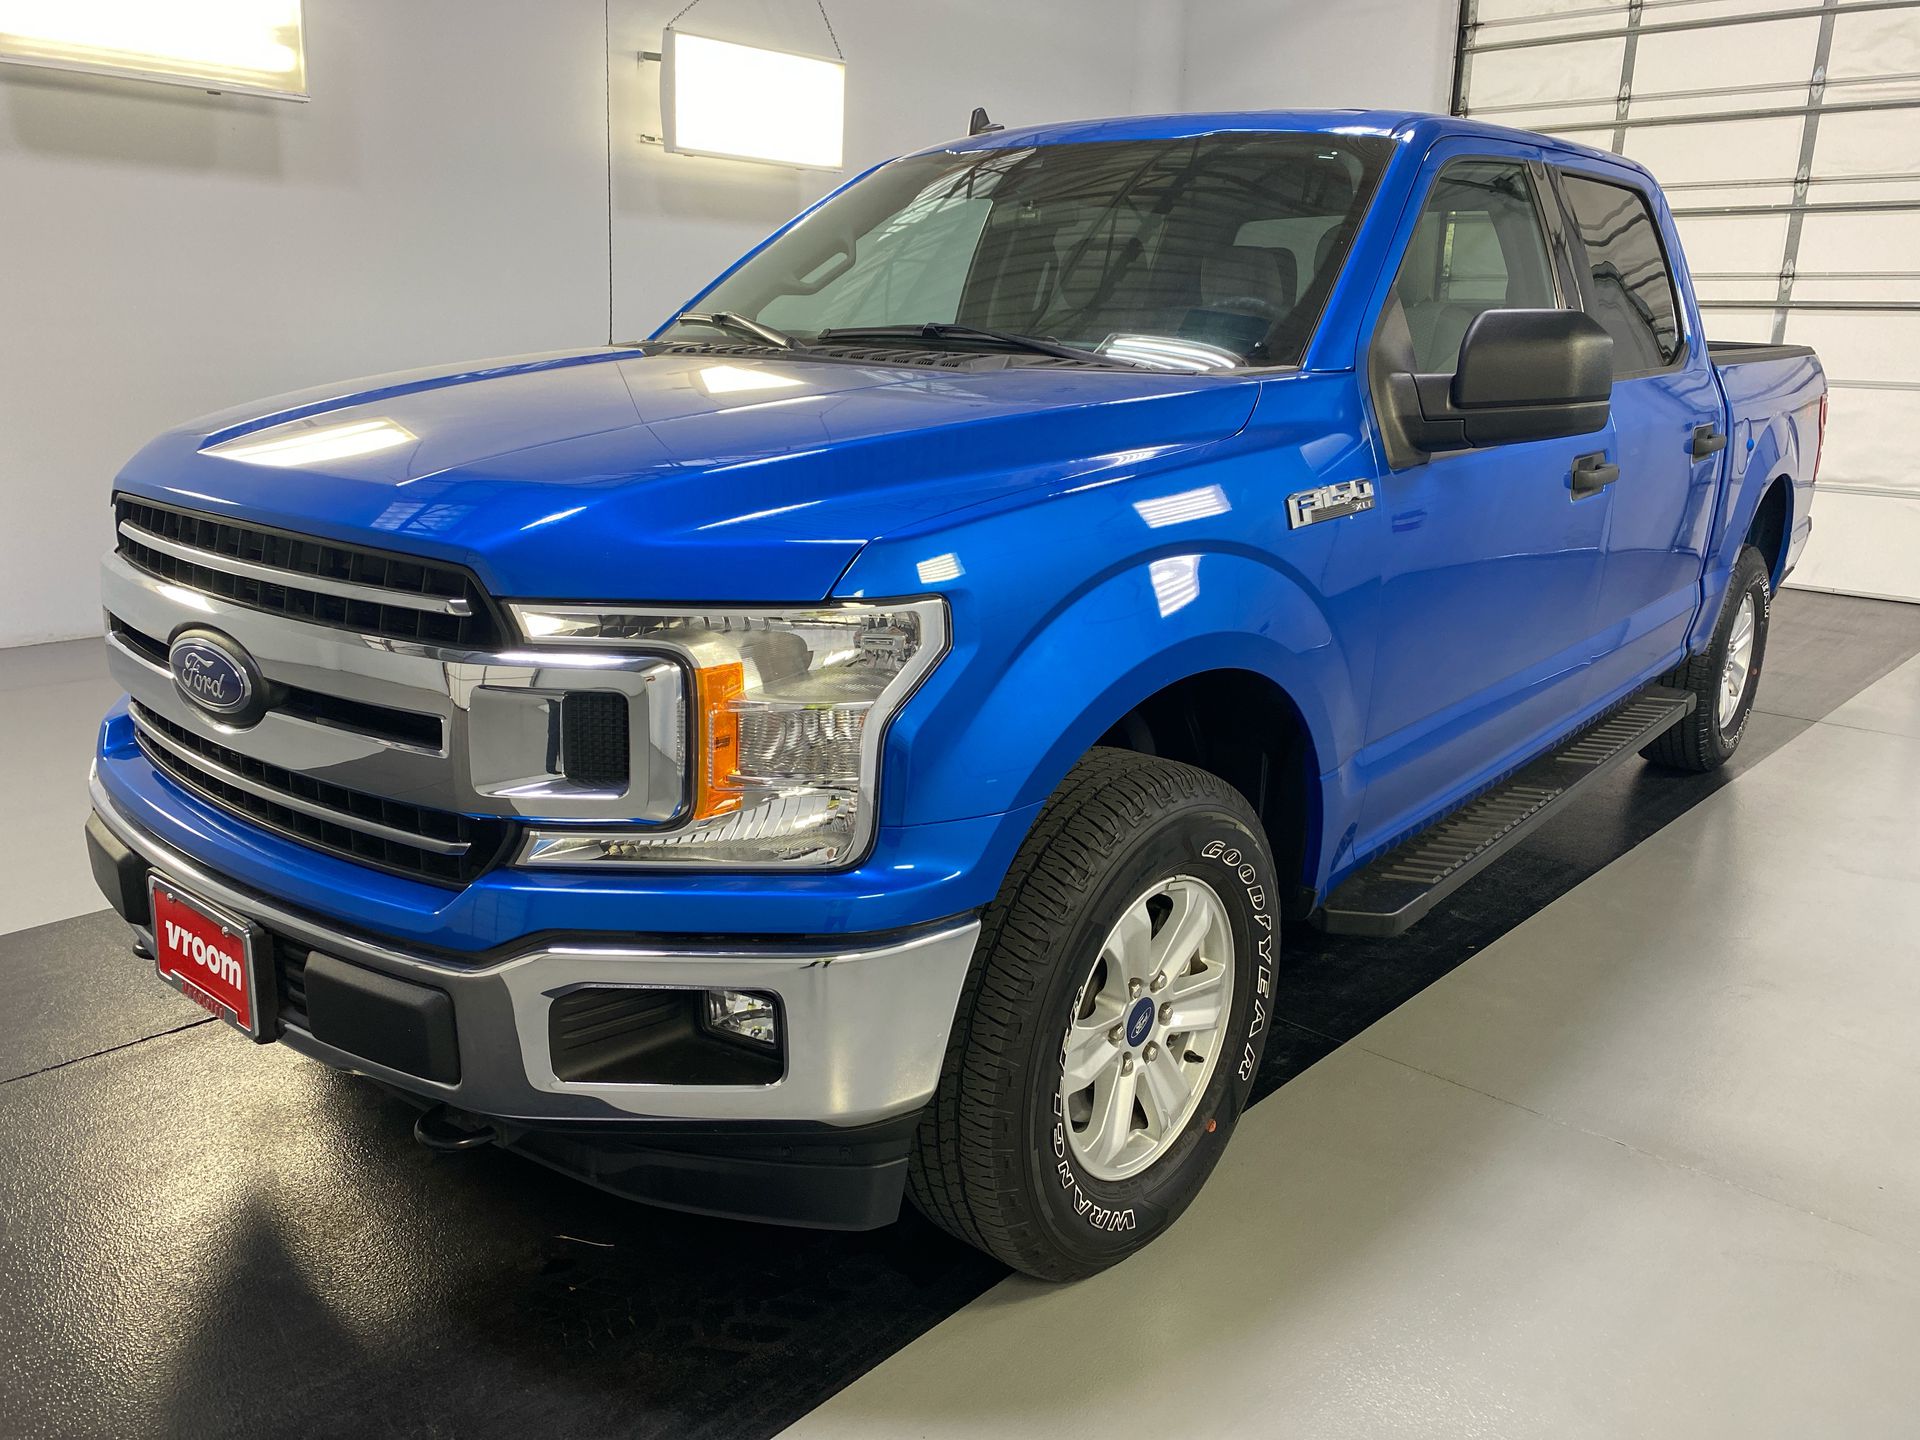 Used 2019 Ford F 150 For Sale 34 999 Vroom